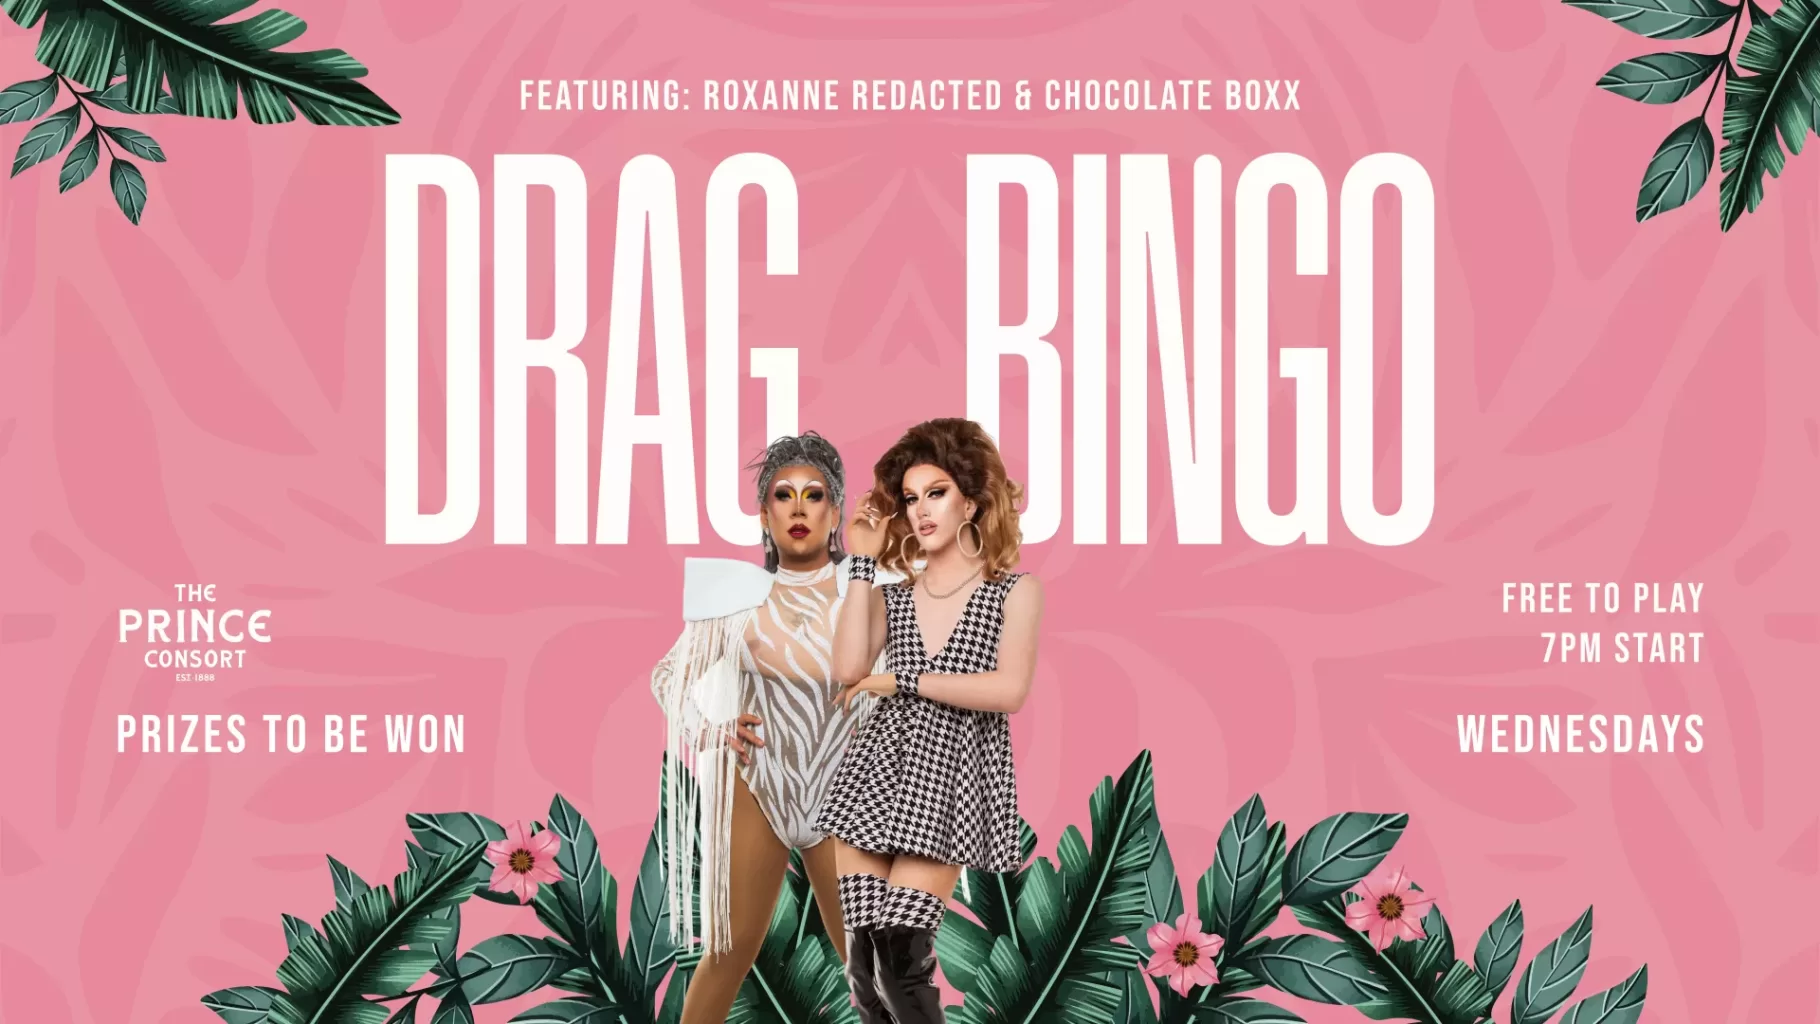 Get Your Tickets to Drag Queen Bingo | Whats on at The Prince Consort